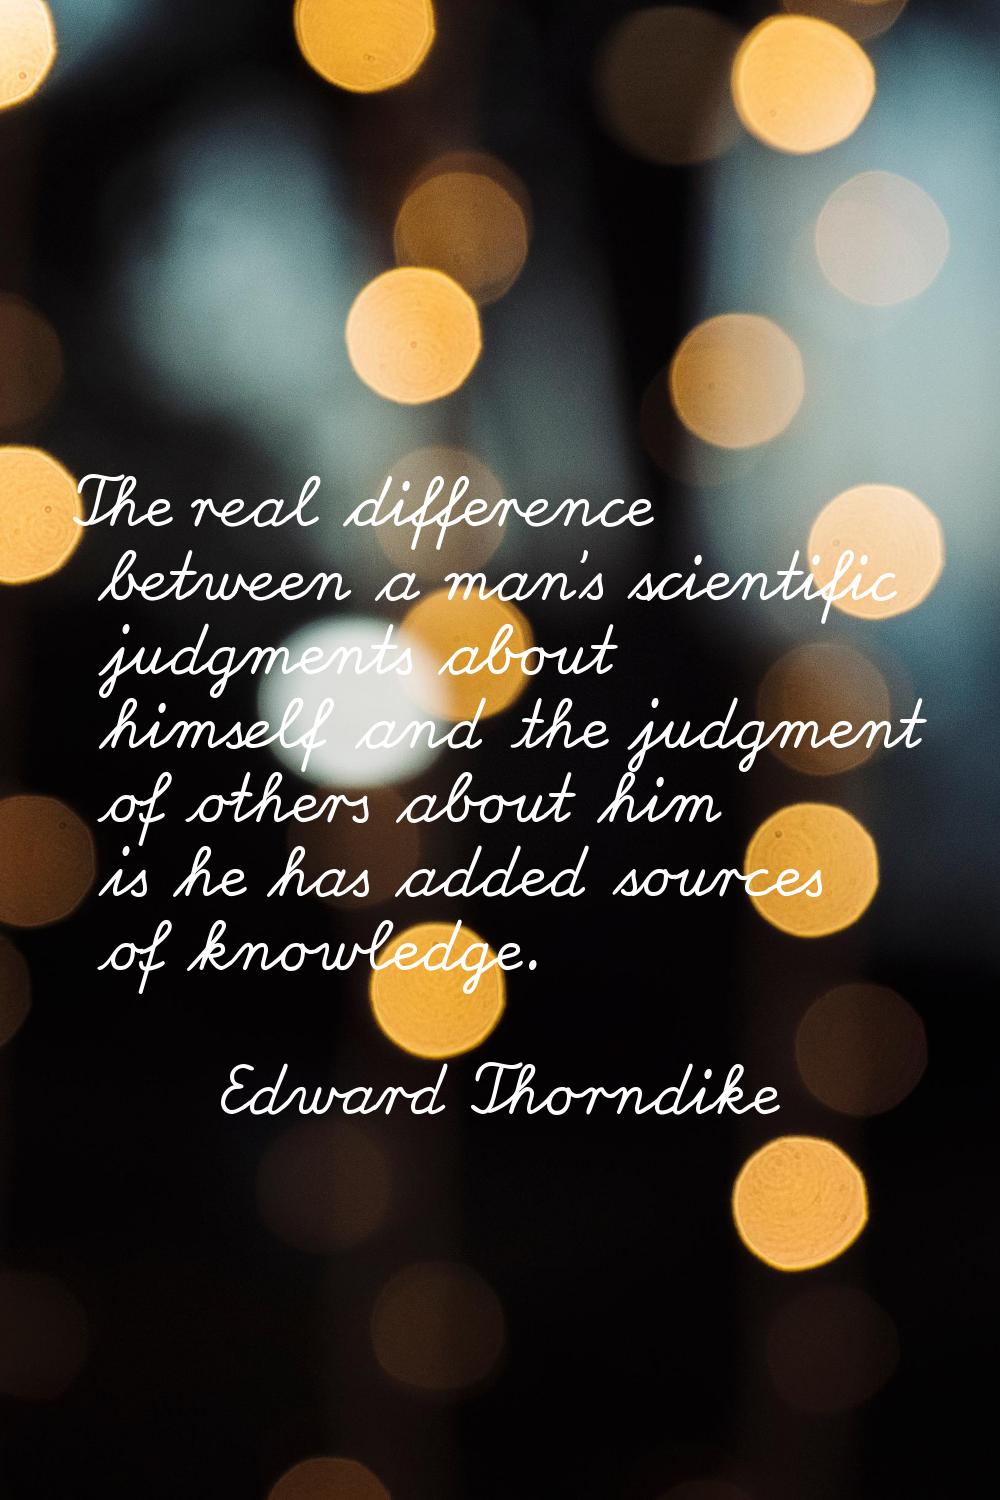 The real difference between a man's scientific judgments about himself and the judgment of others a